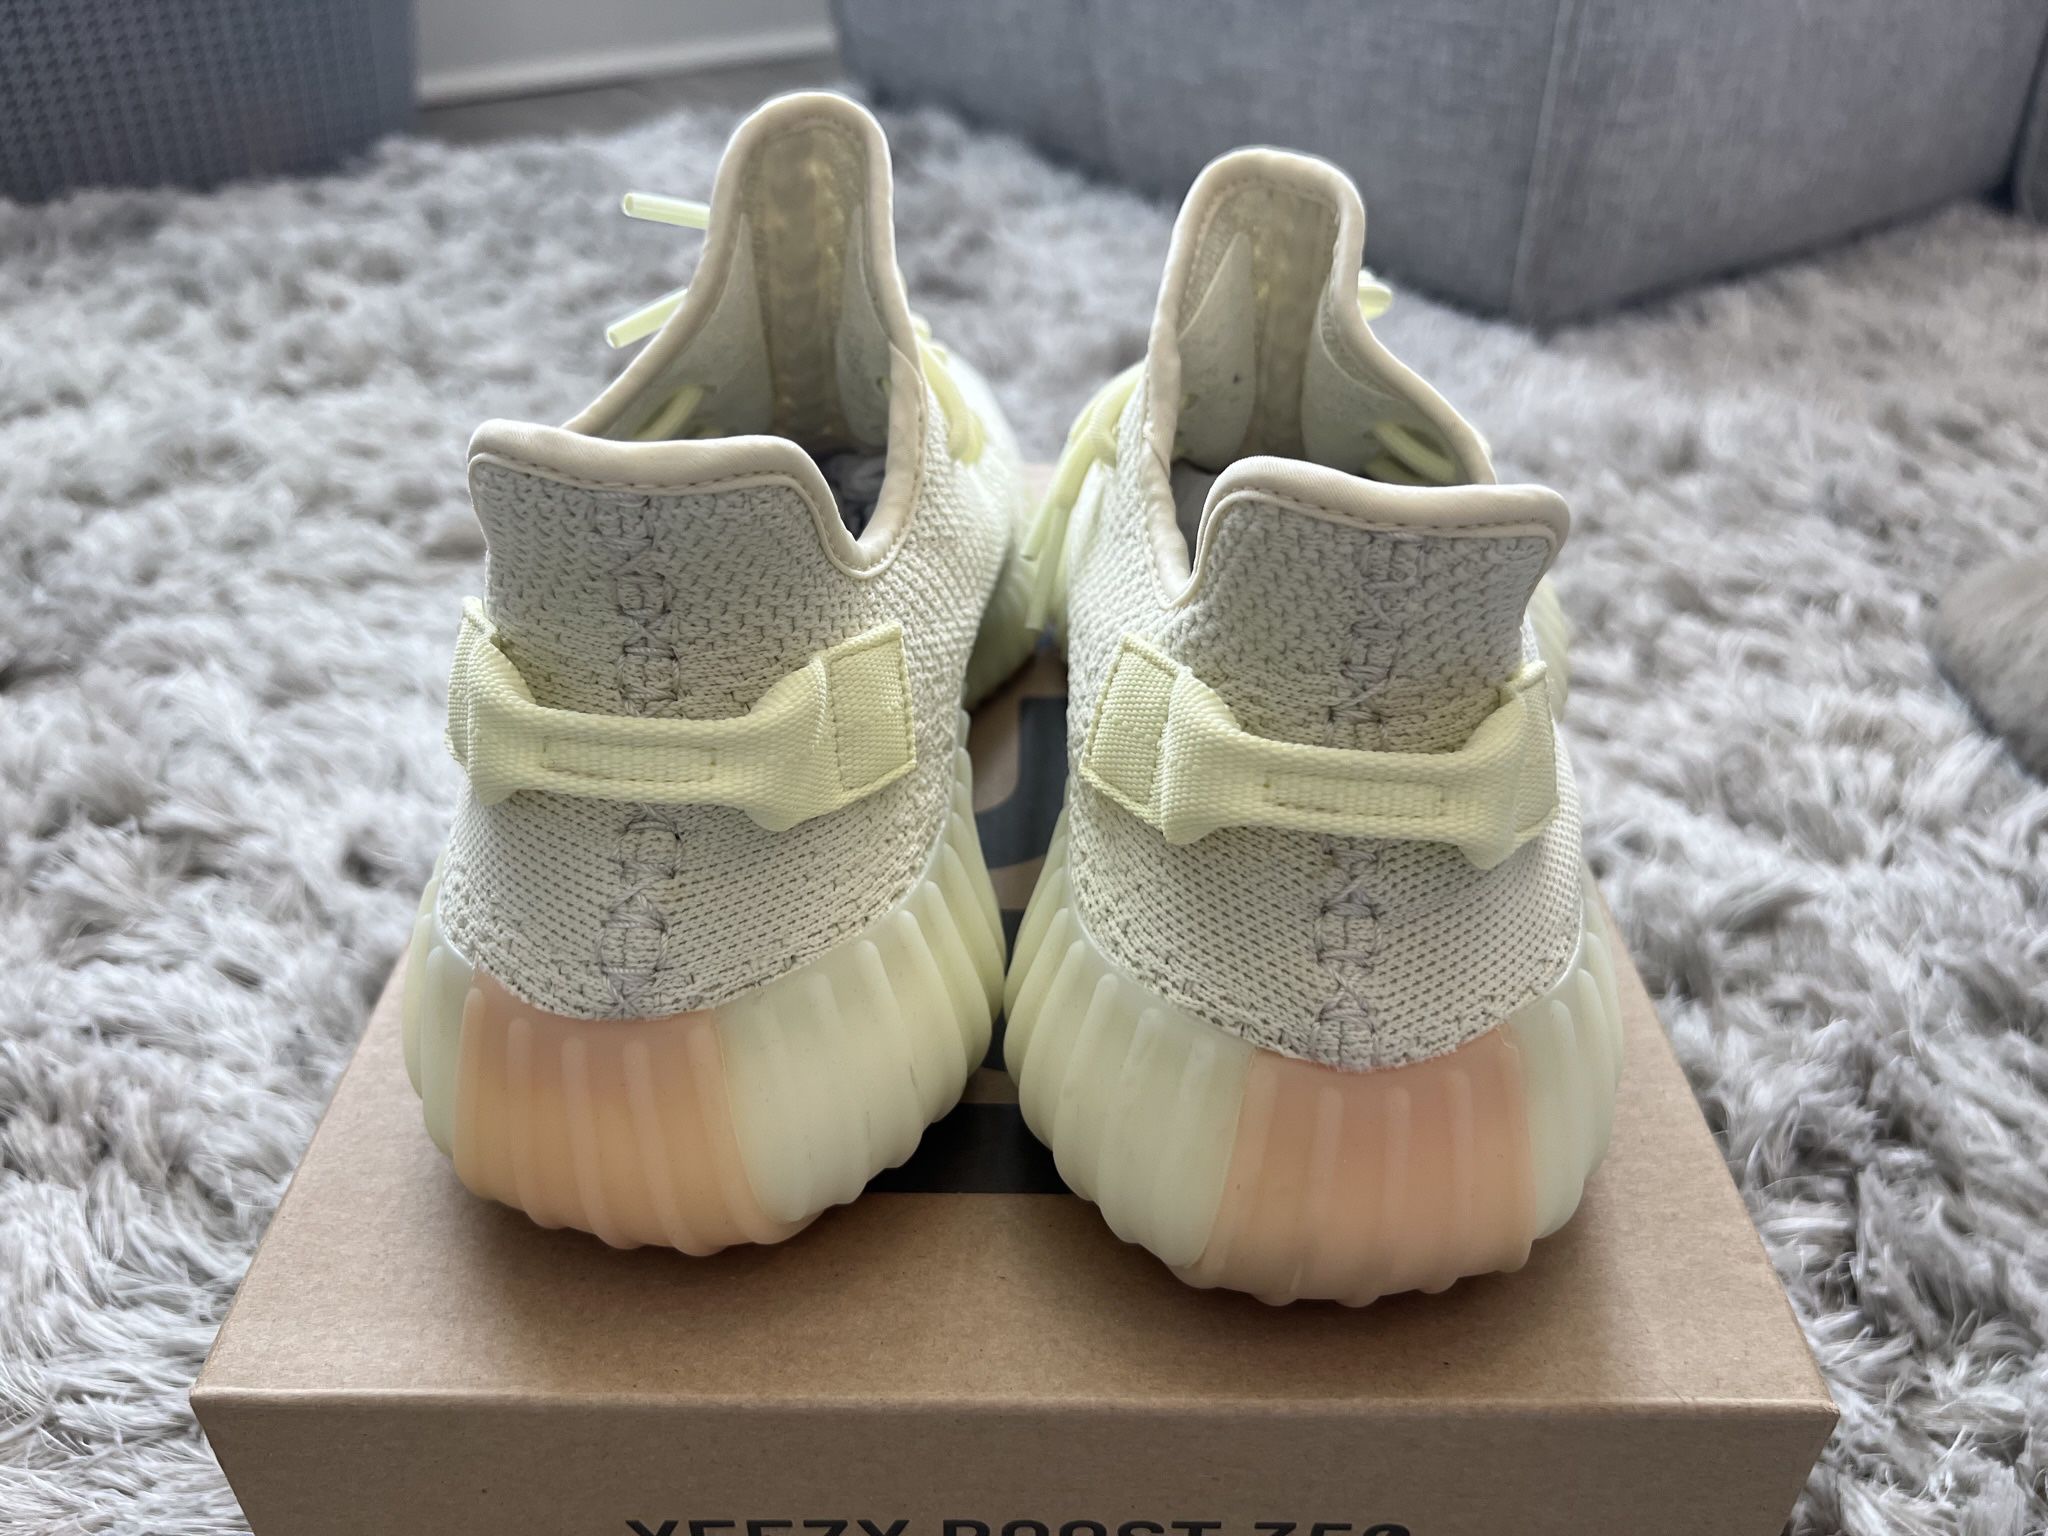 Adidas Yeezy 350 Butter Size 8.5